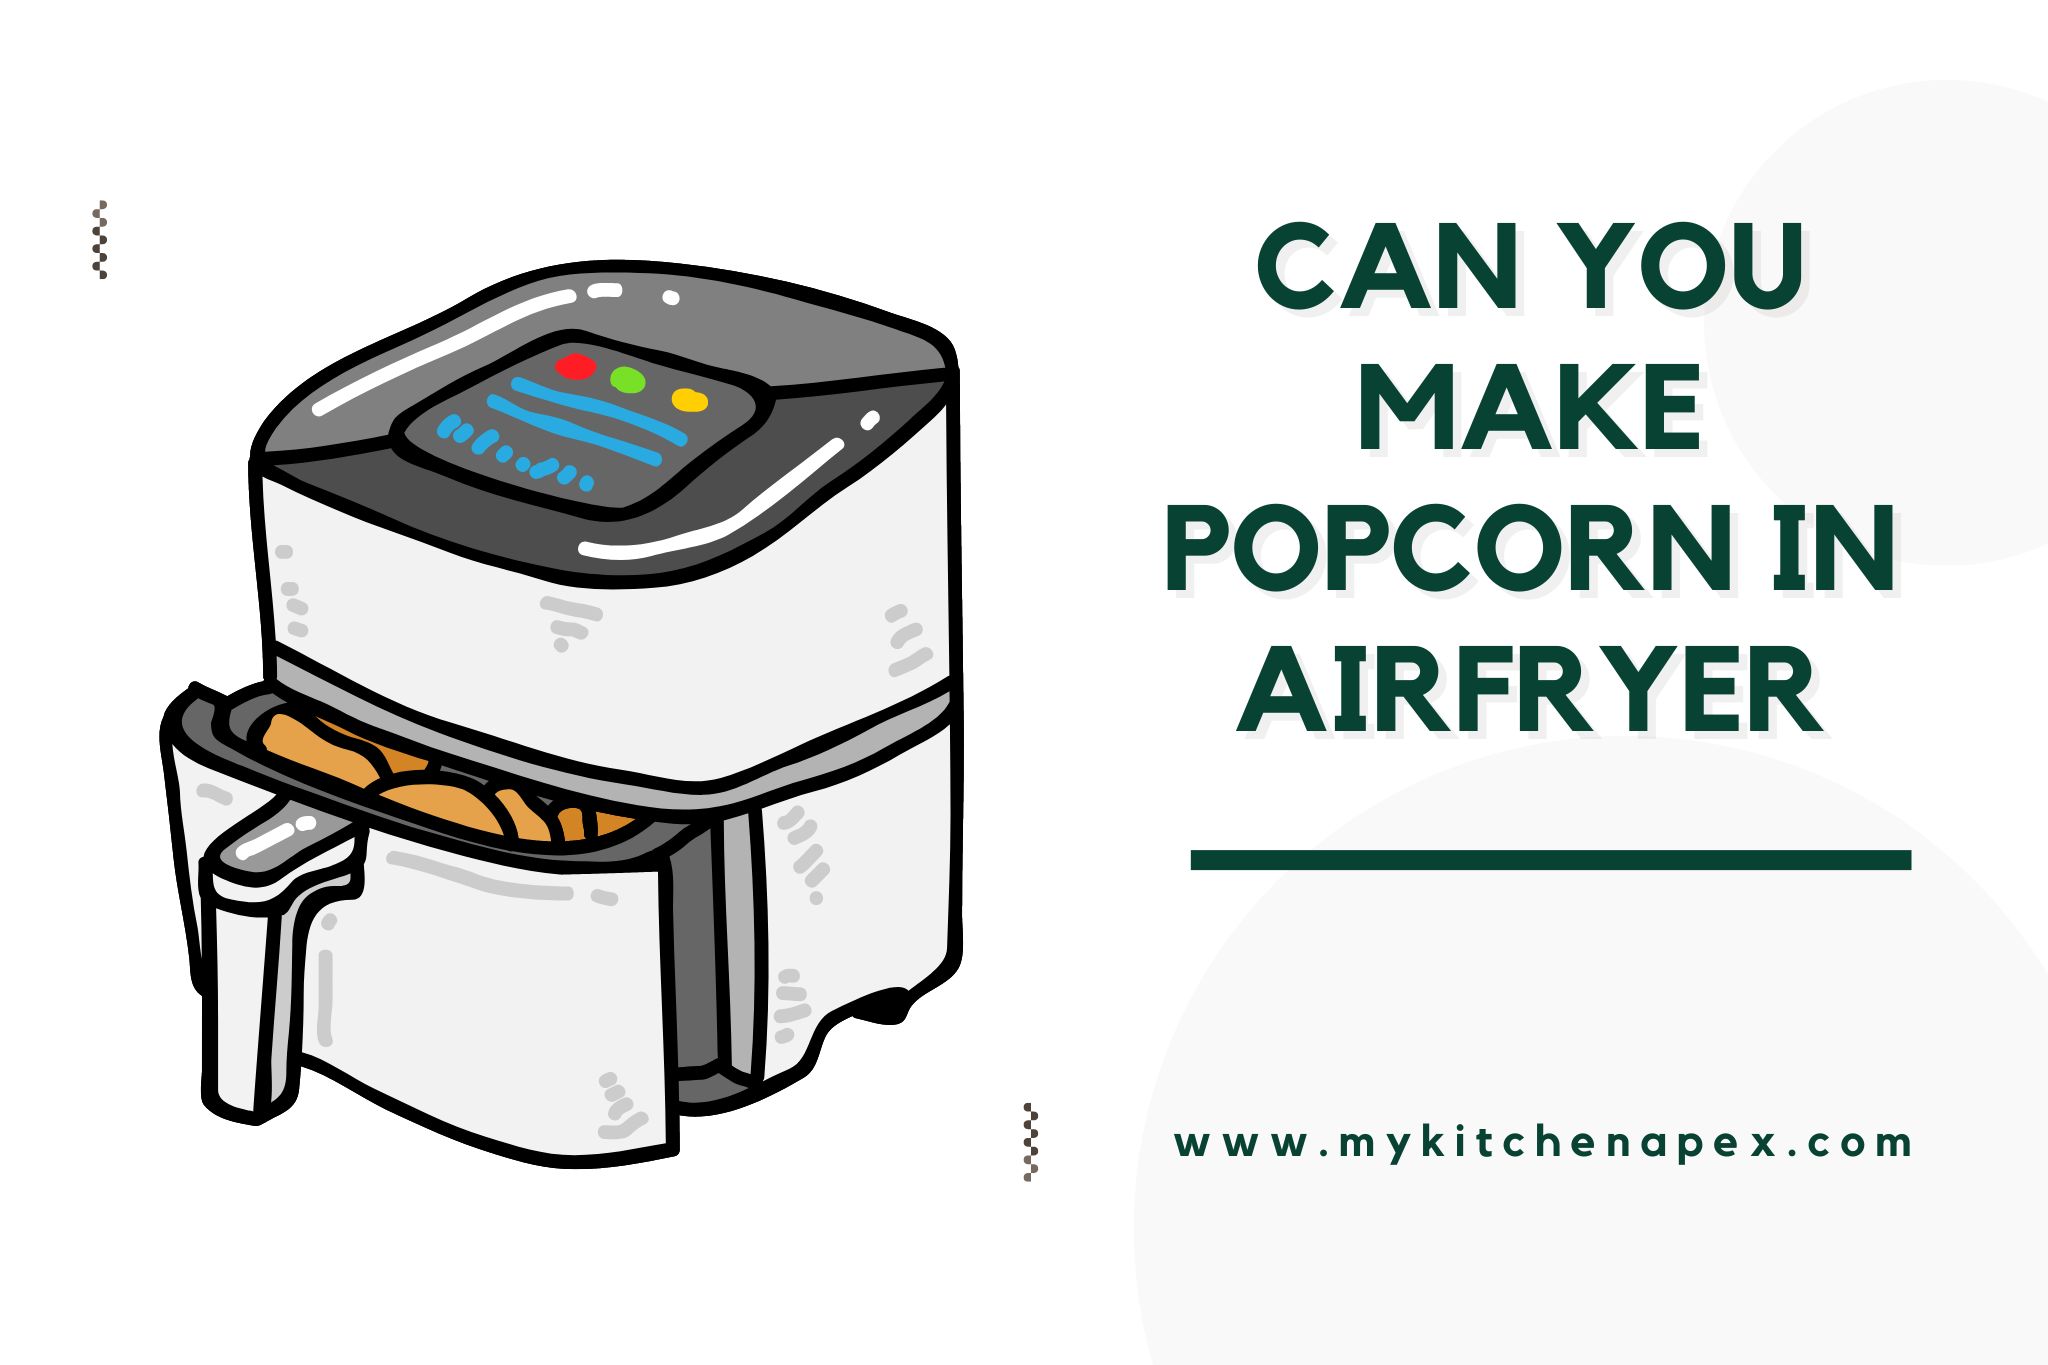 can you make popcorn in airfryer